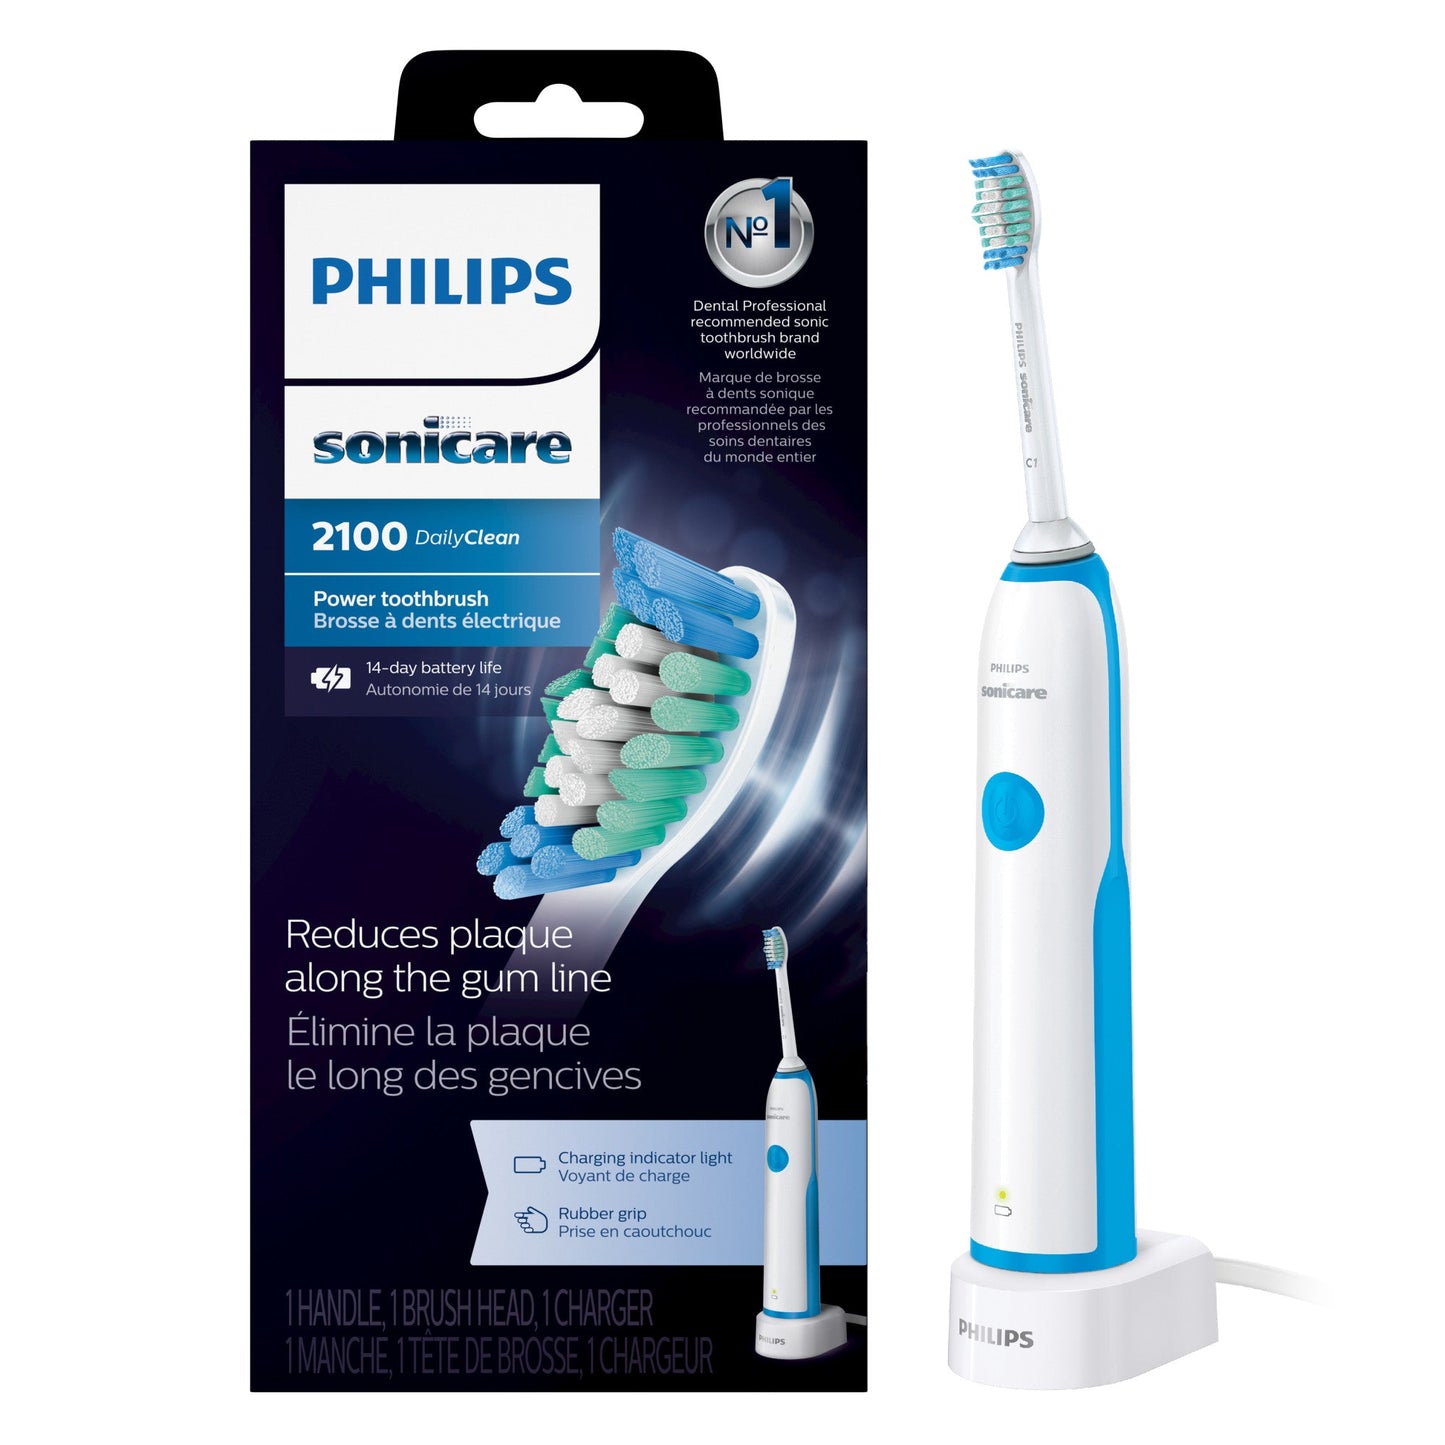 Philips Sonicare Dailyclean 2100 Rechargeable Electric Toothbrush, HX3211/17